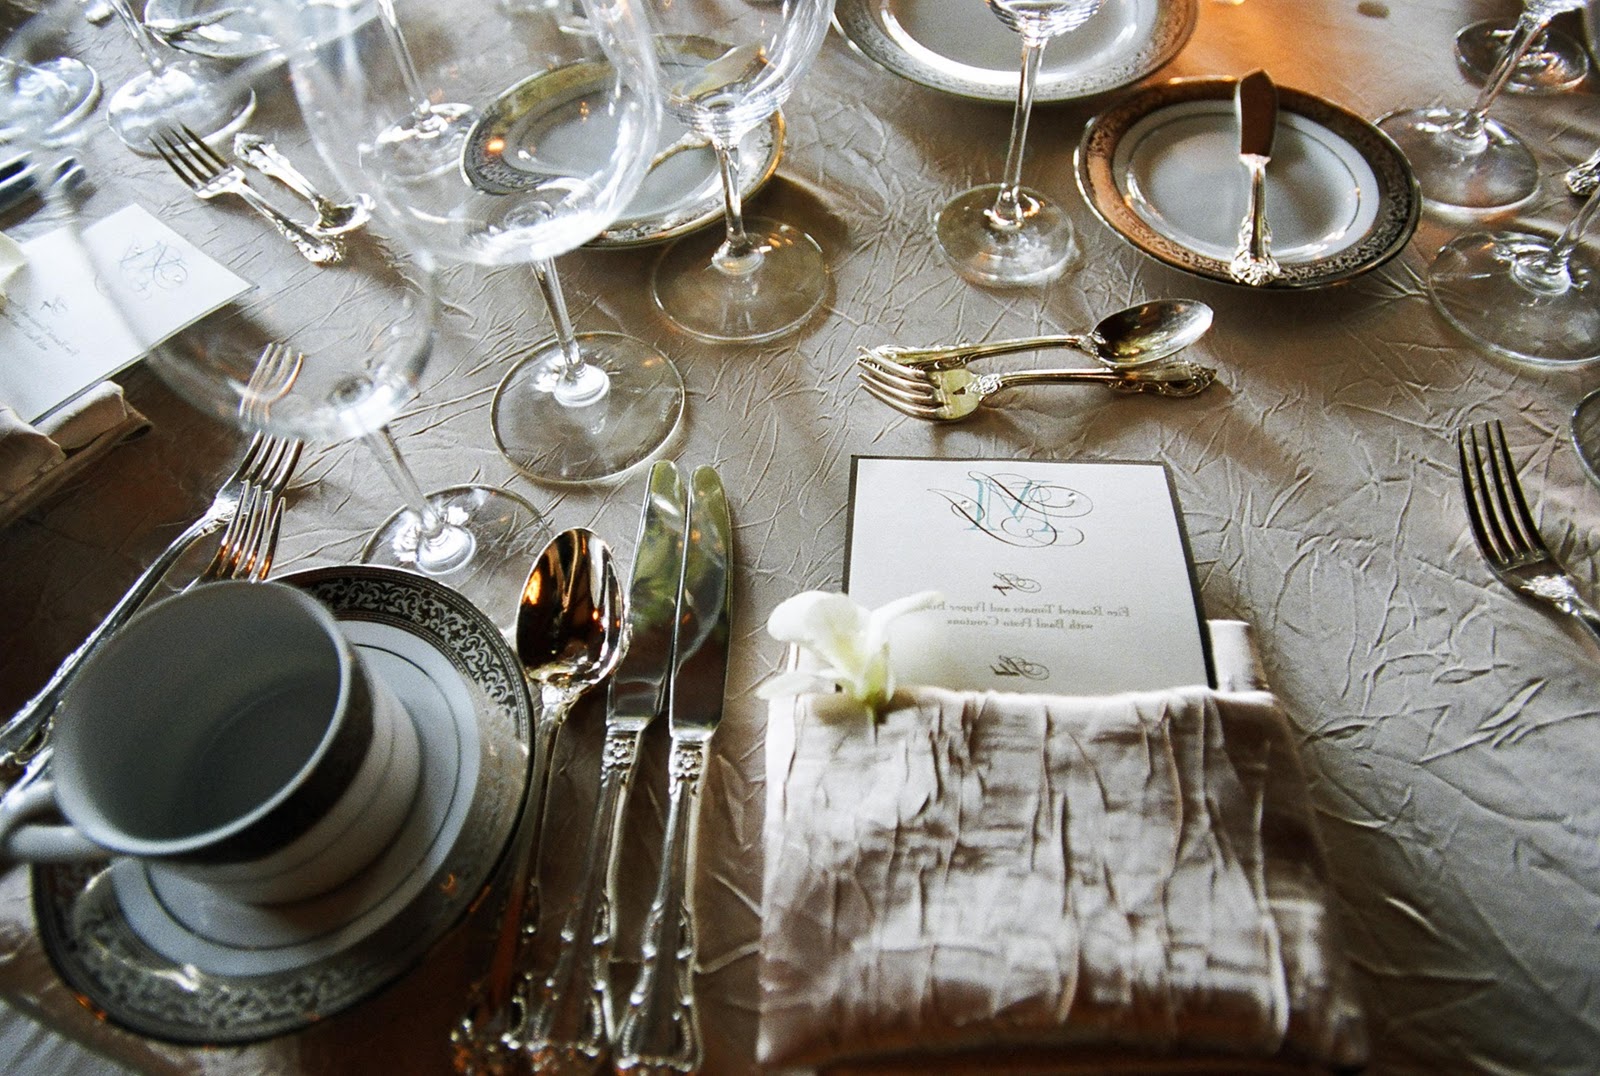 The table setting with menu